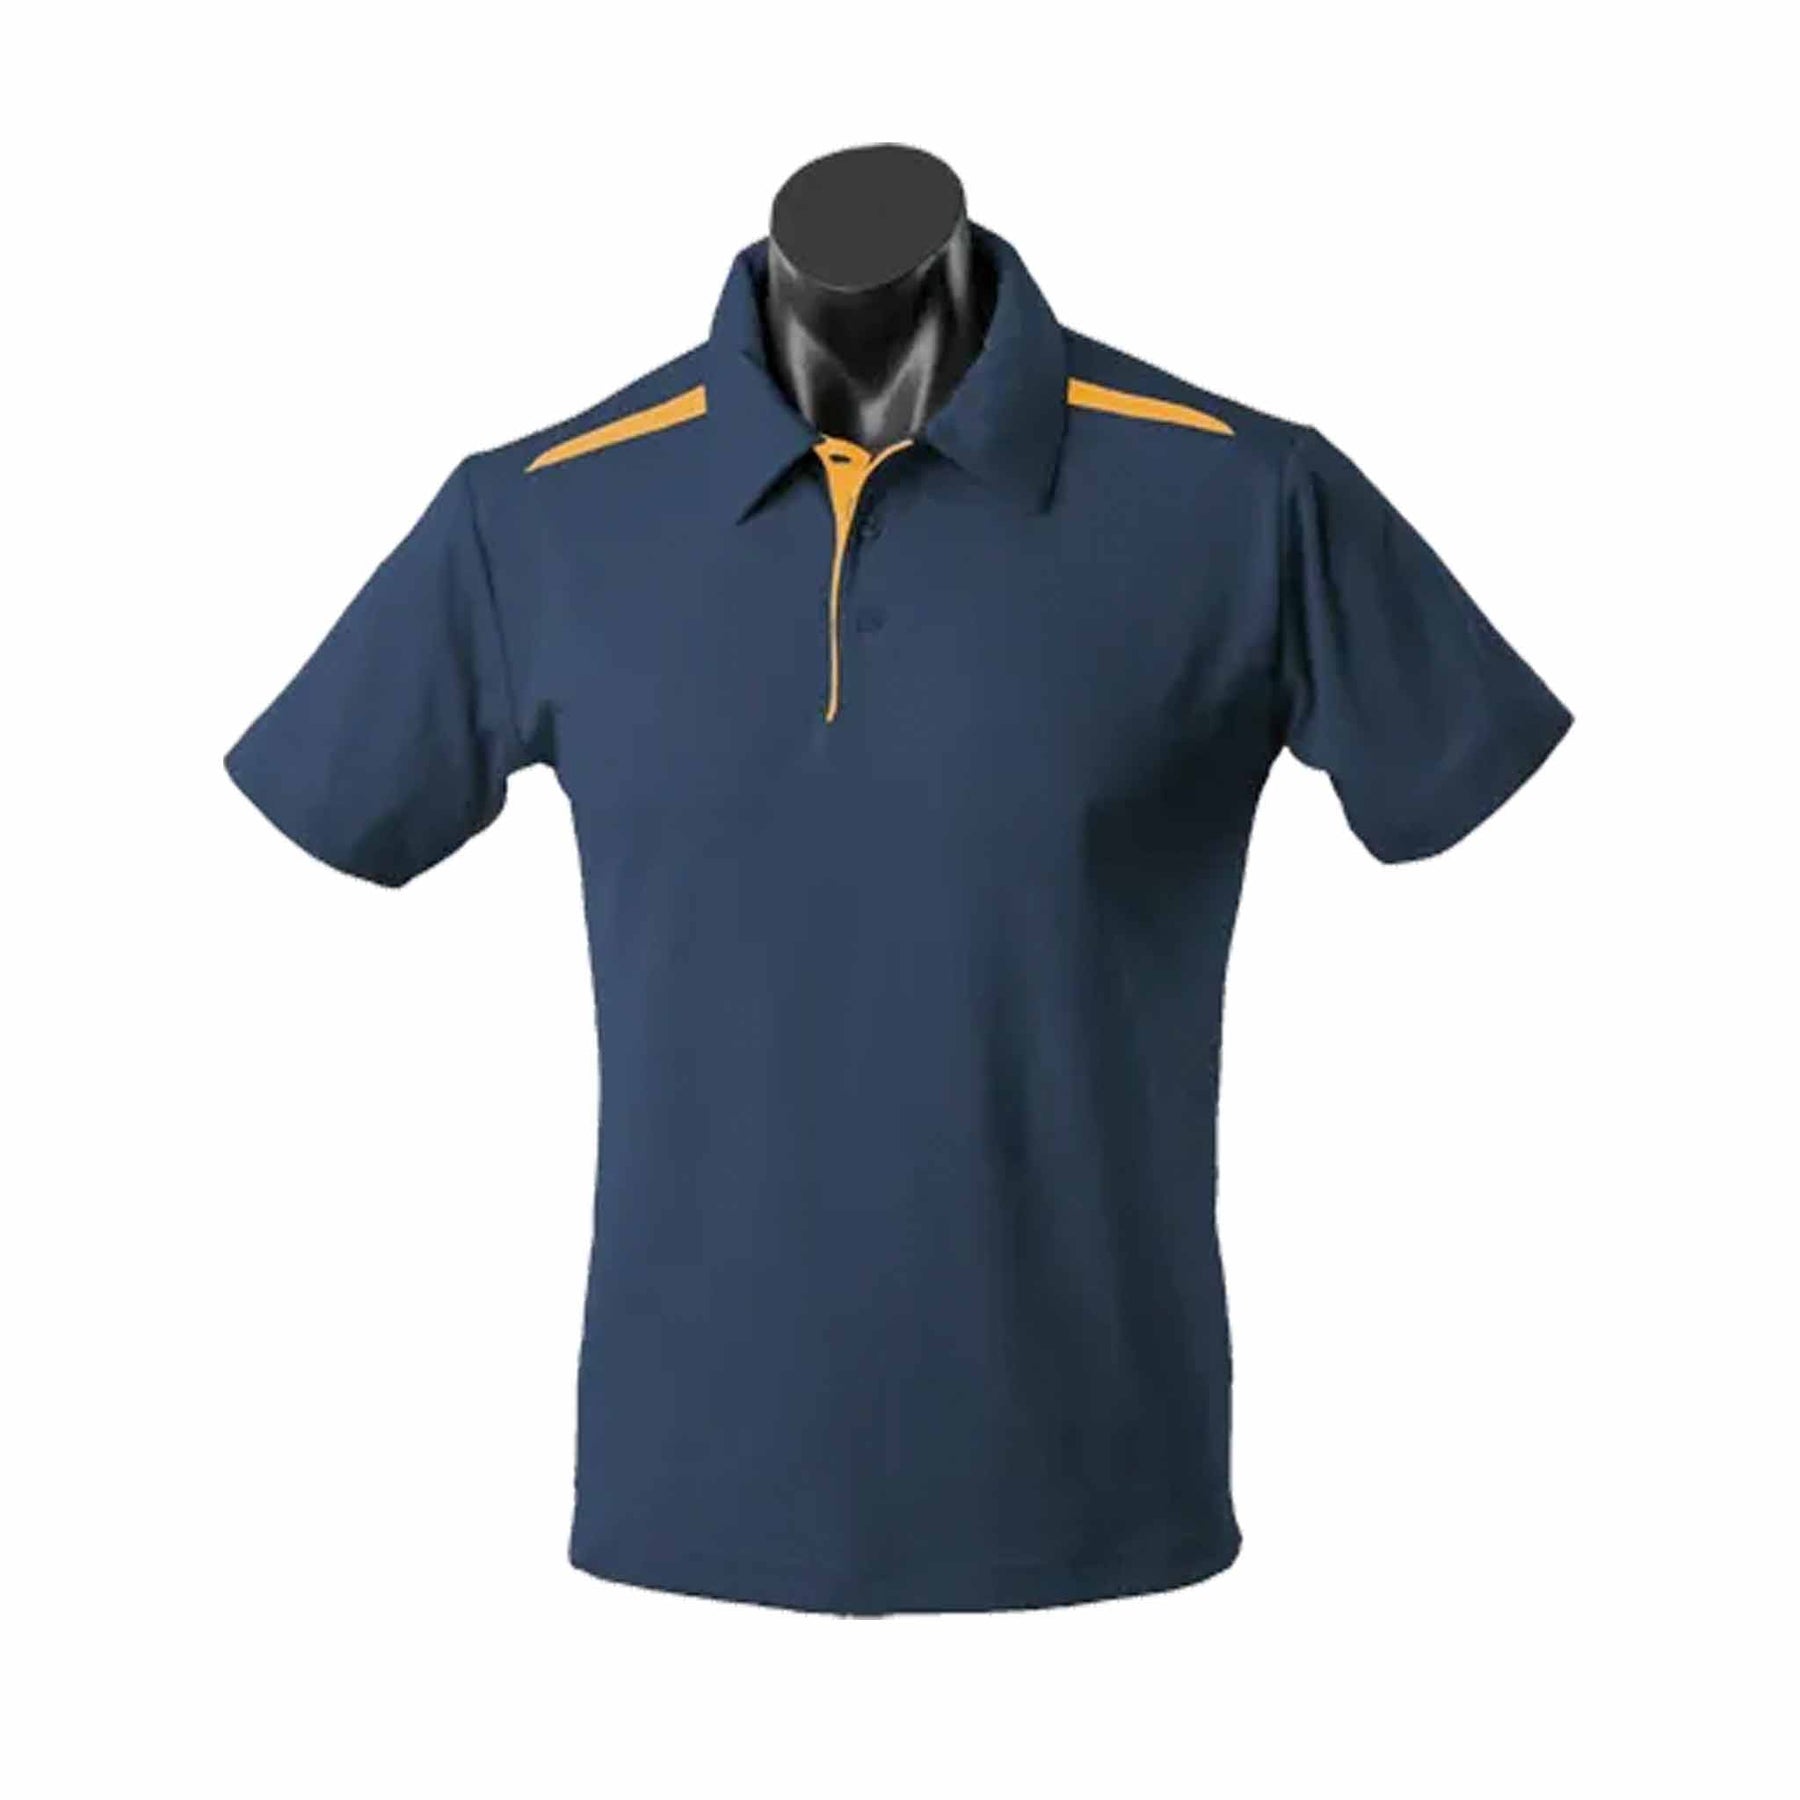 aussie pacific paterson mens polo in navy gold